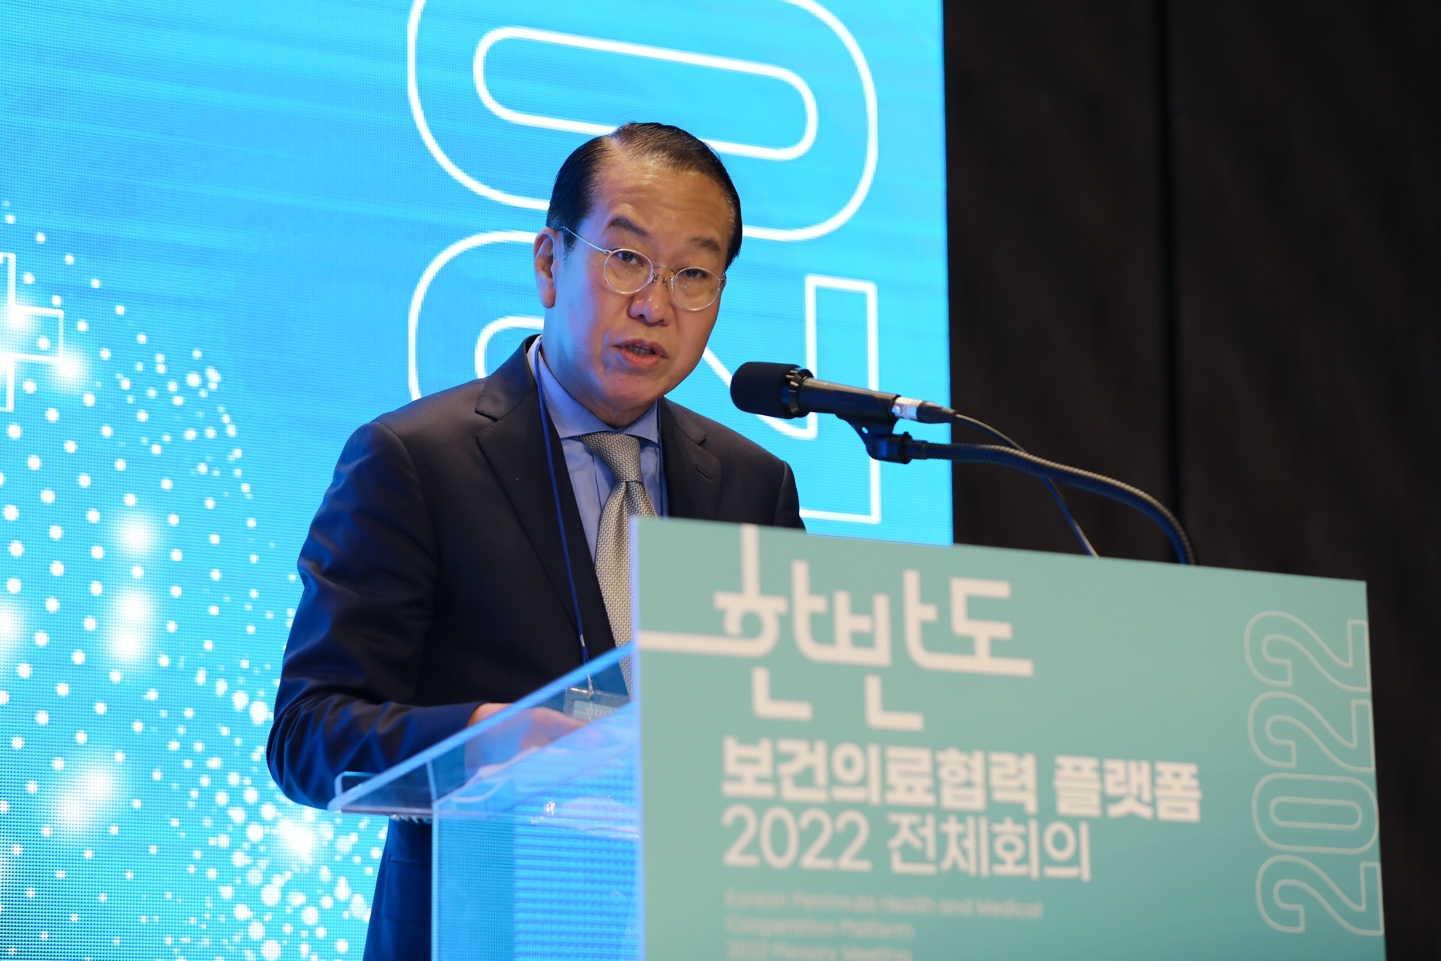 Unification Minister Kwon Youngse delivers opening remarks at Health and Medical Cooperation Platform on the Korean Peninsula